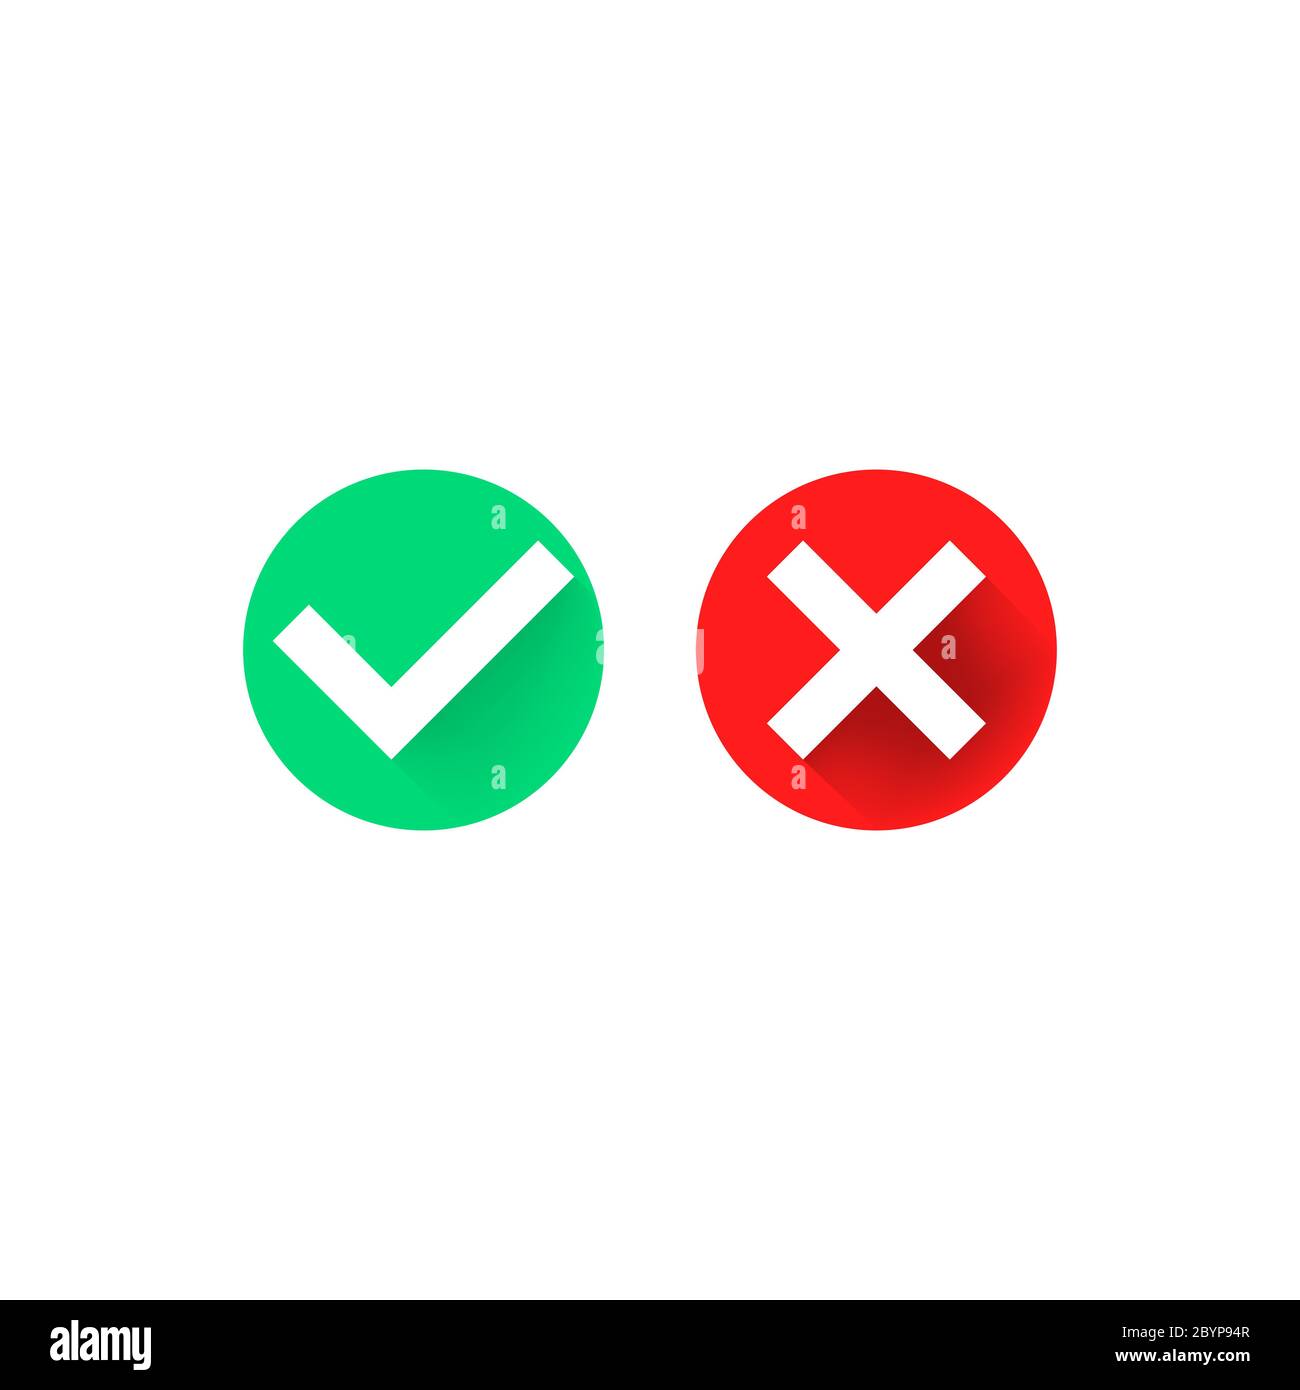 Check, checkmark, cross icon flat on isolated white background. EPS 10 vector. Stock Vector